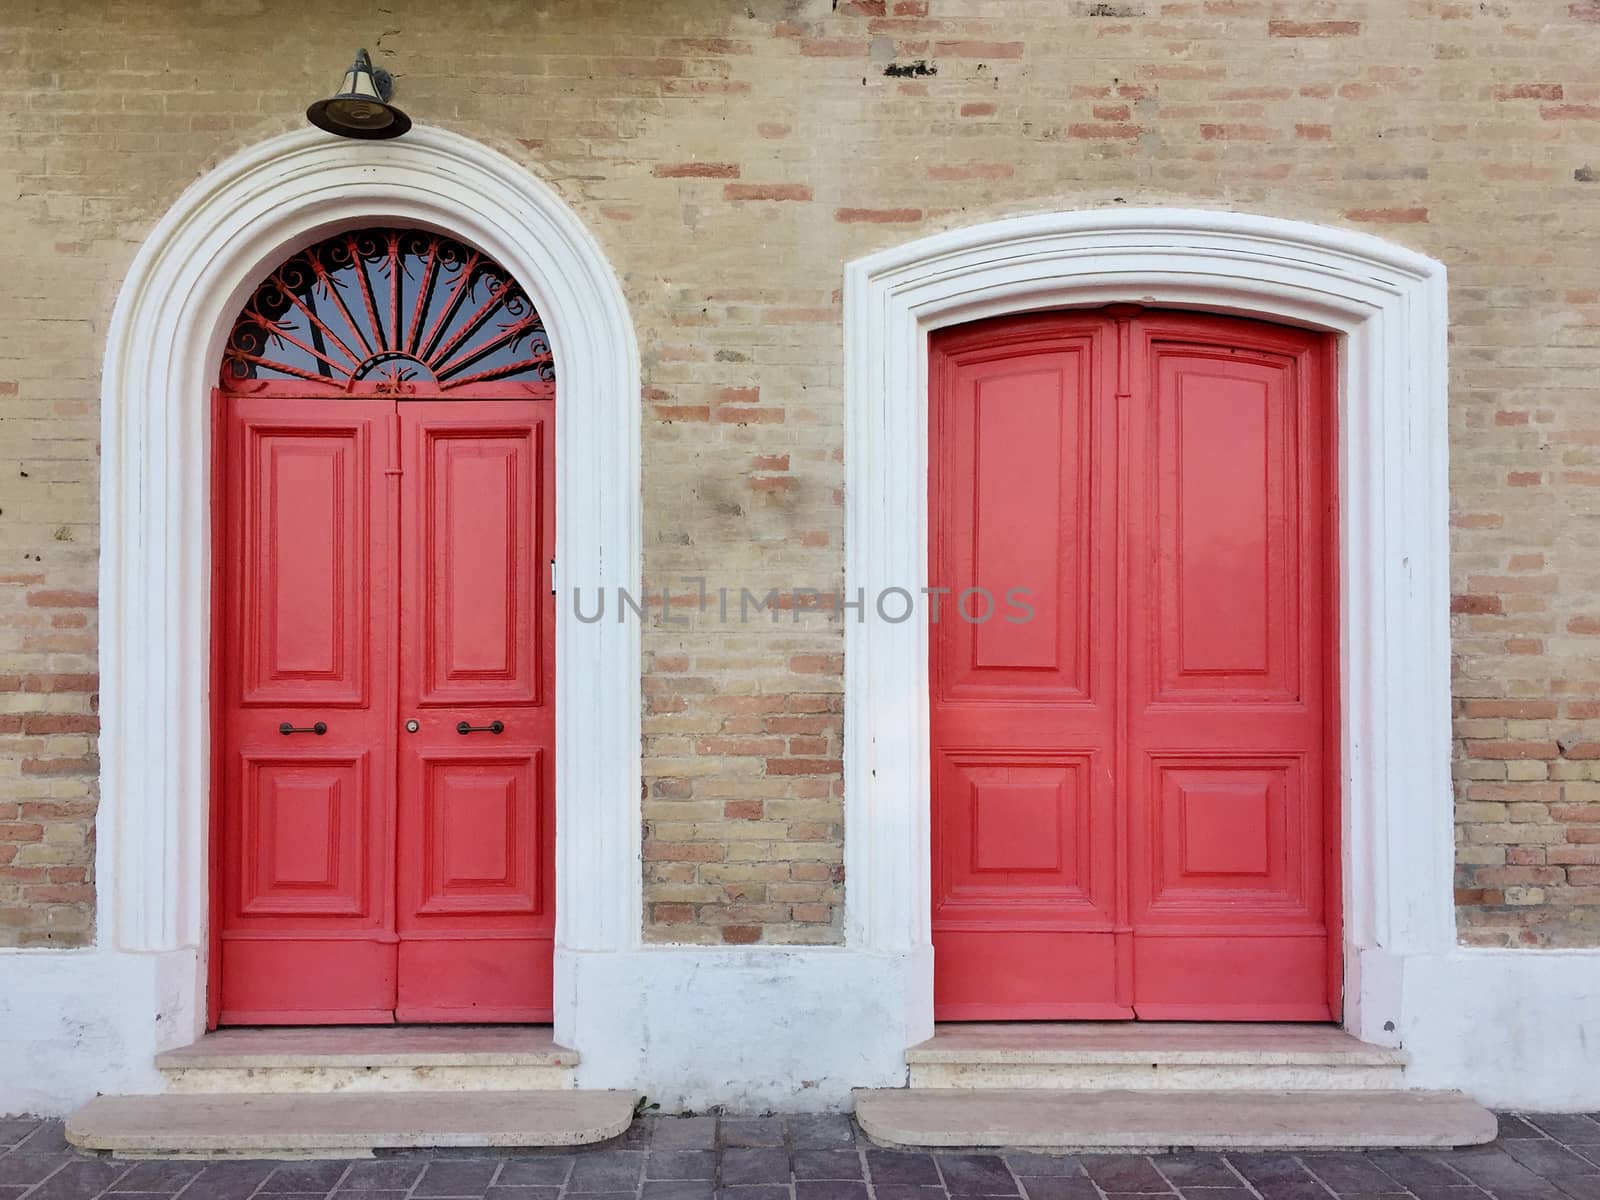 Vintage red doors of a bricked house in Italy